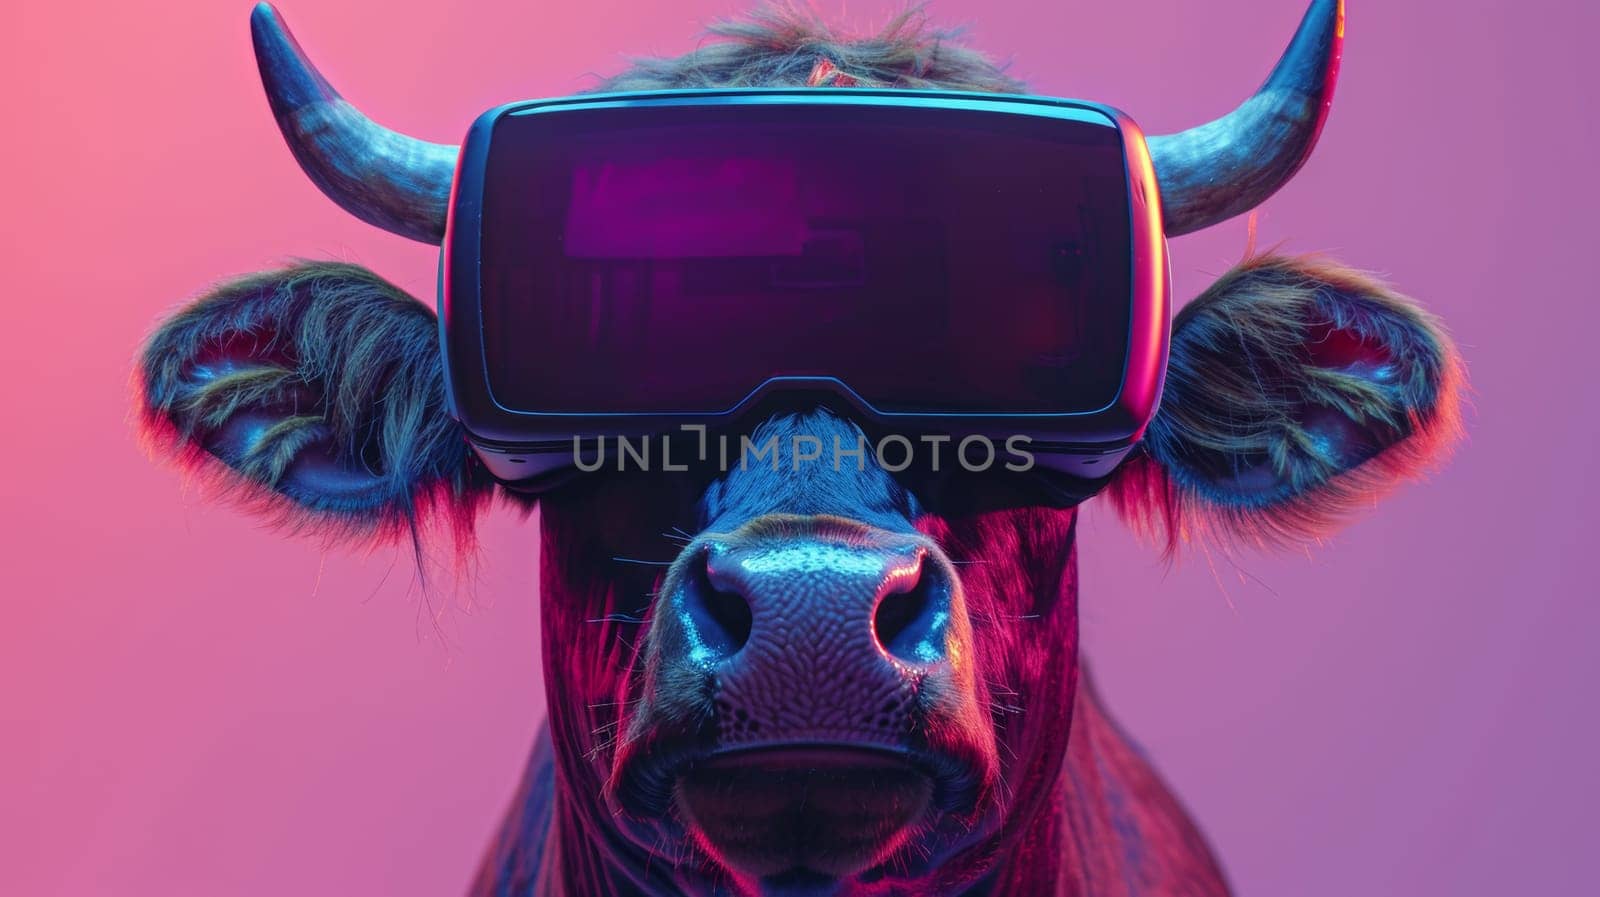 A cow wearing a pair of virtual reality goggles on its head